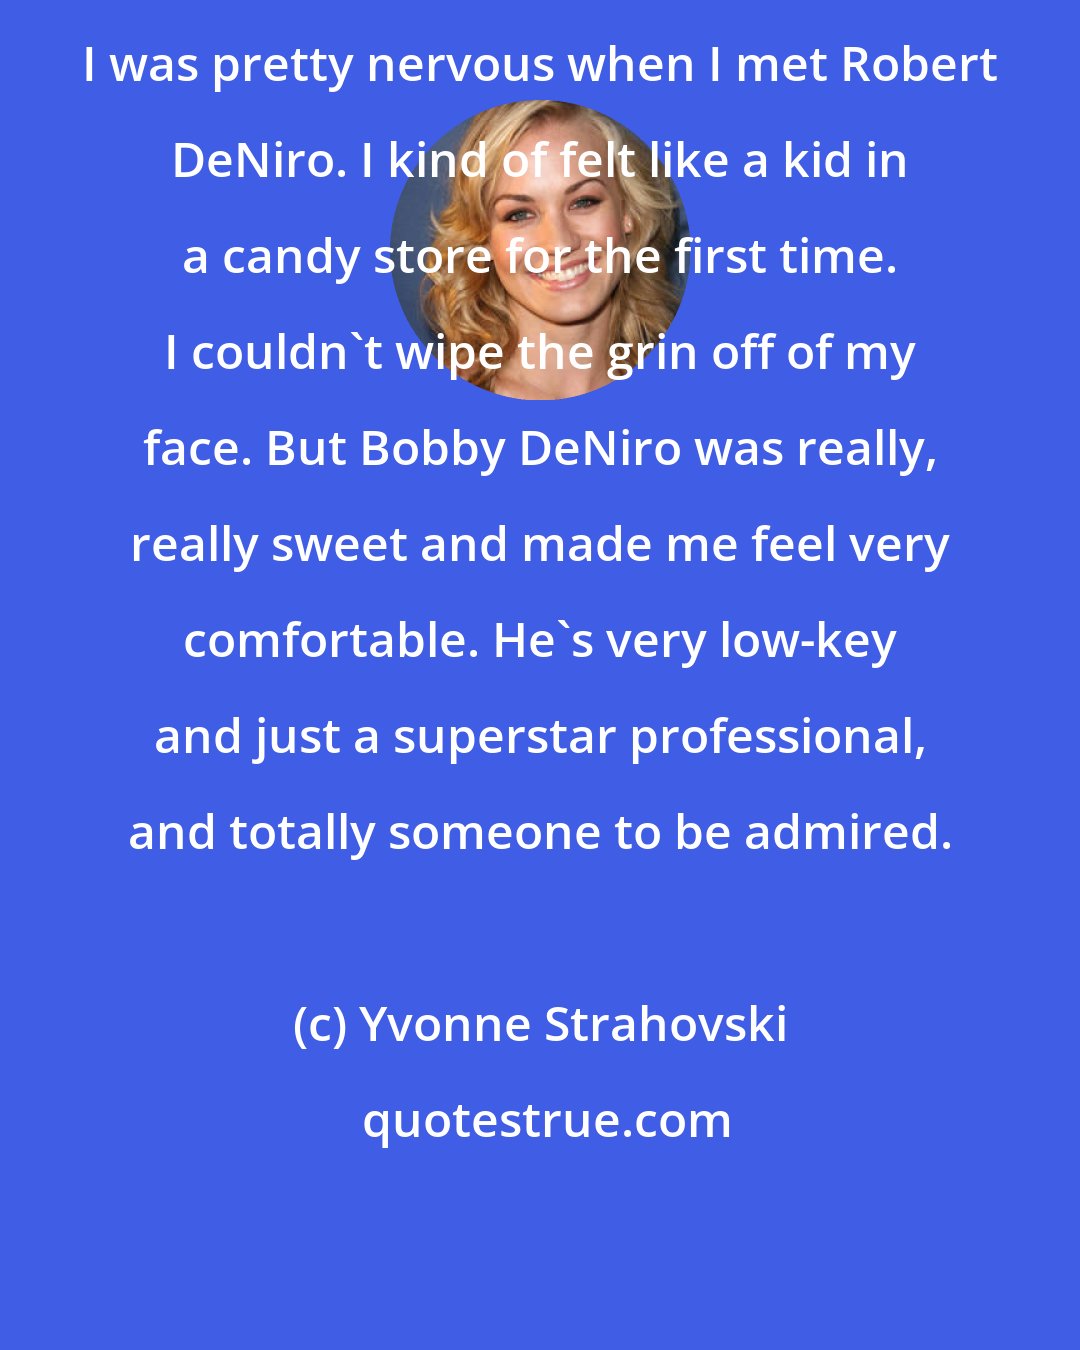 Yvonne Strahovski: I was pretty nervous when I met Robert DeNiro. I kind of felt like a kid in a candy store for the first time. I couldn't wipe the grin off of my face. But Bobby DeNiro was really, really sweet and made me feel very comfortable. He's very low-key and just a superstar professional, and totally someone to be admired.